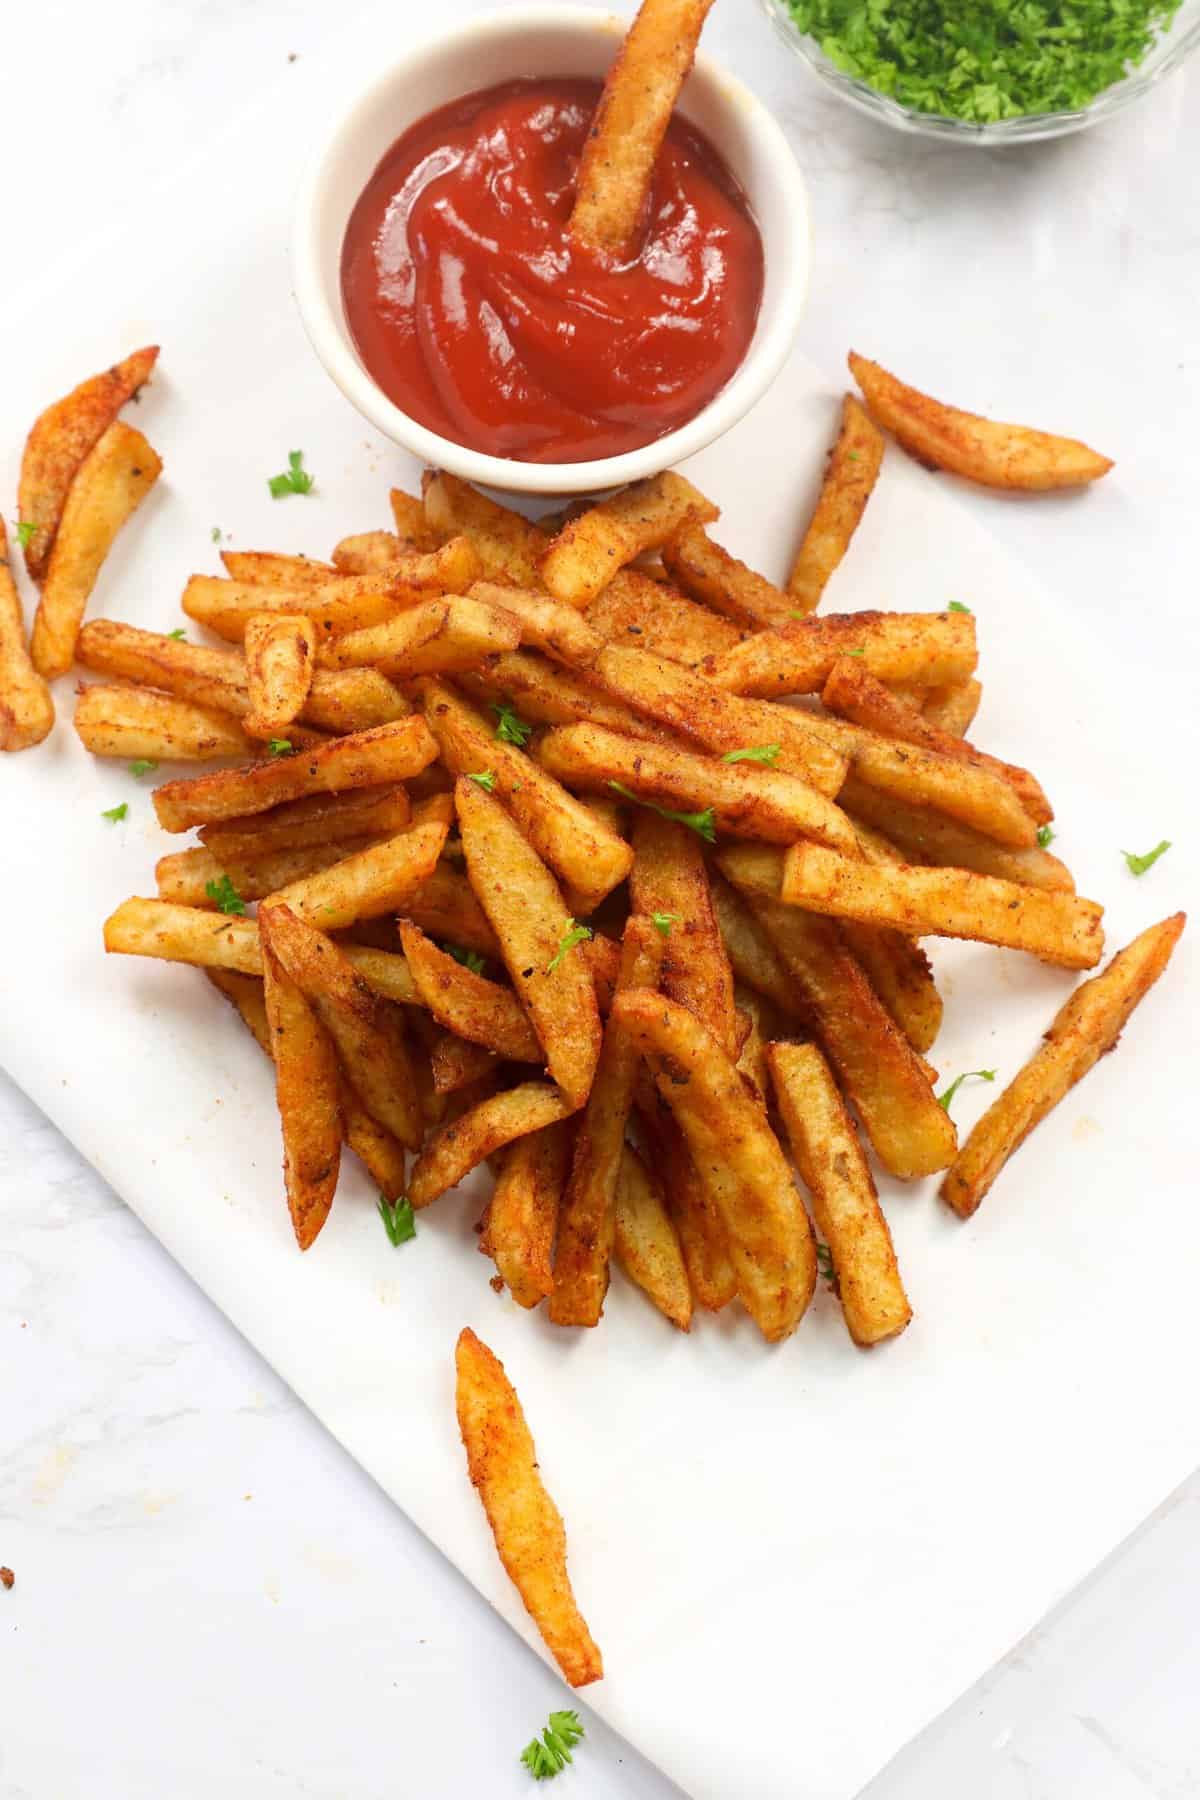 Baked Cajun fries fresh from the oven with ketchup